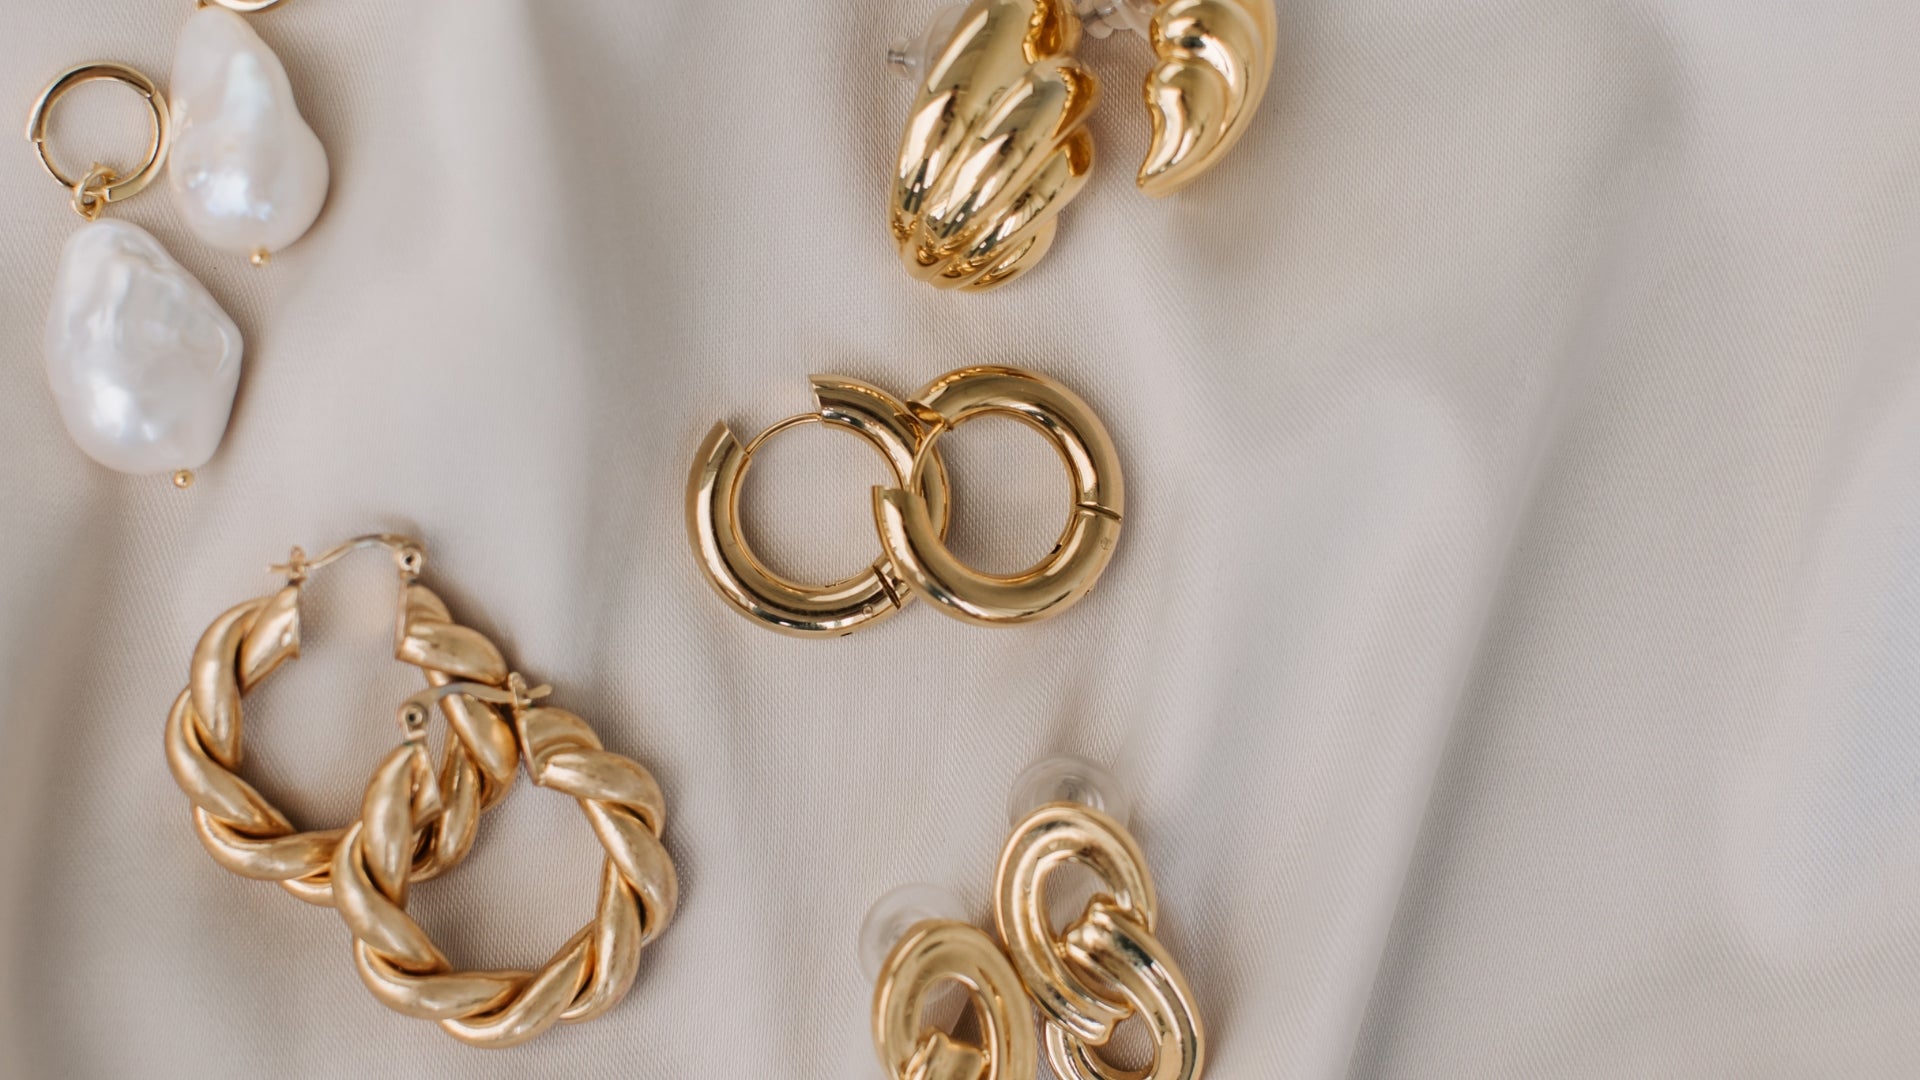 gold earrings laid on white cloth